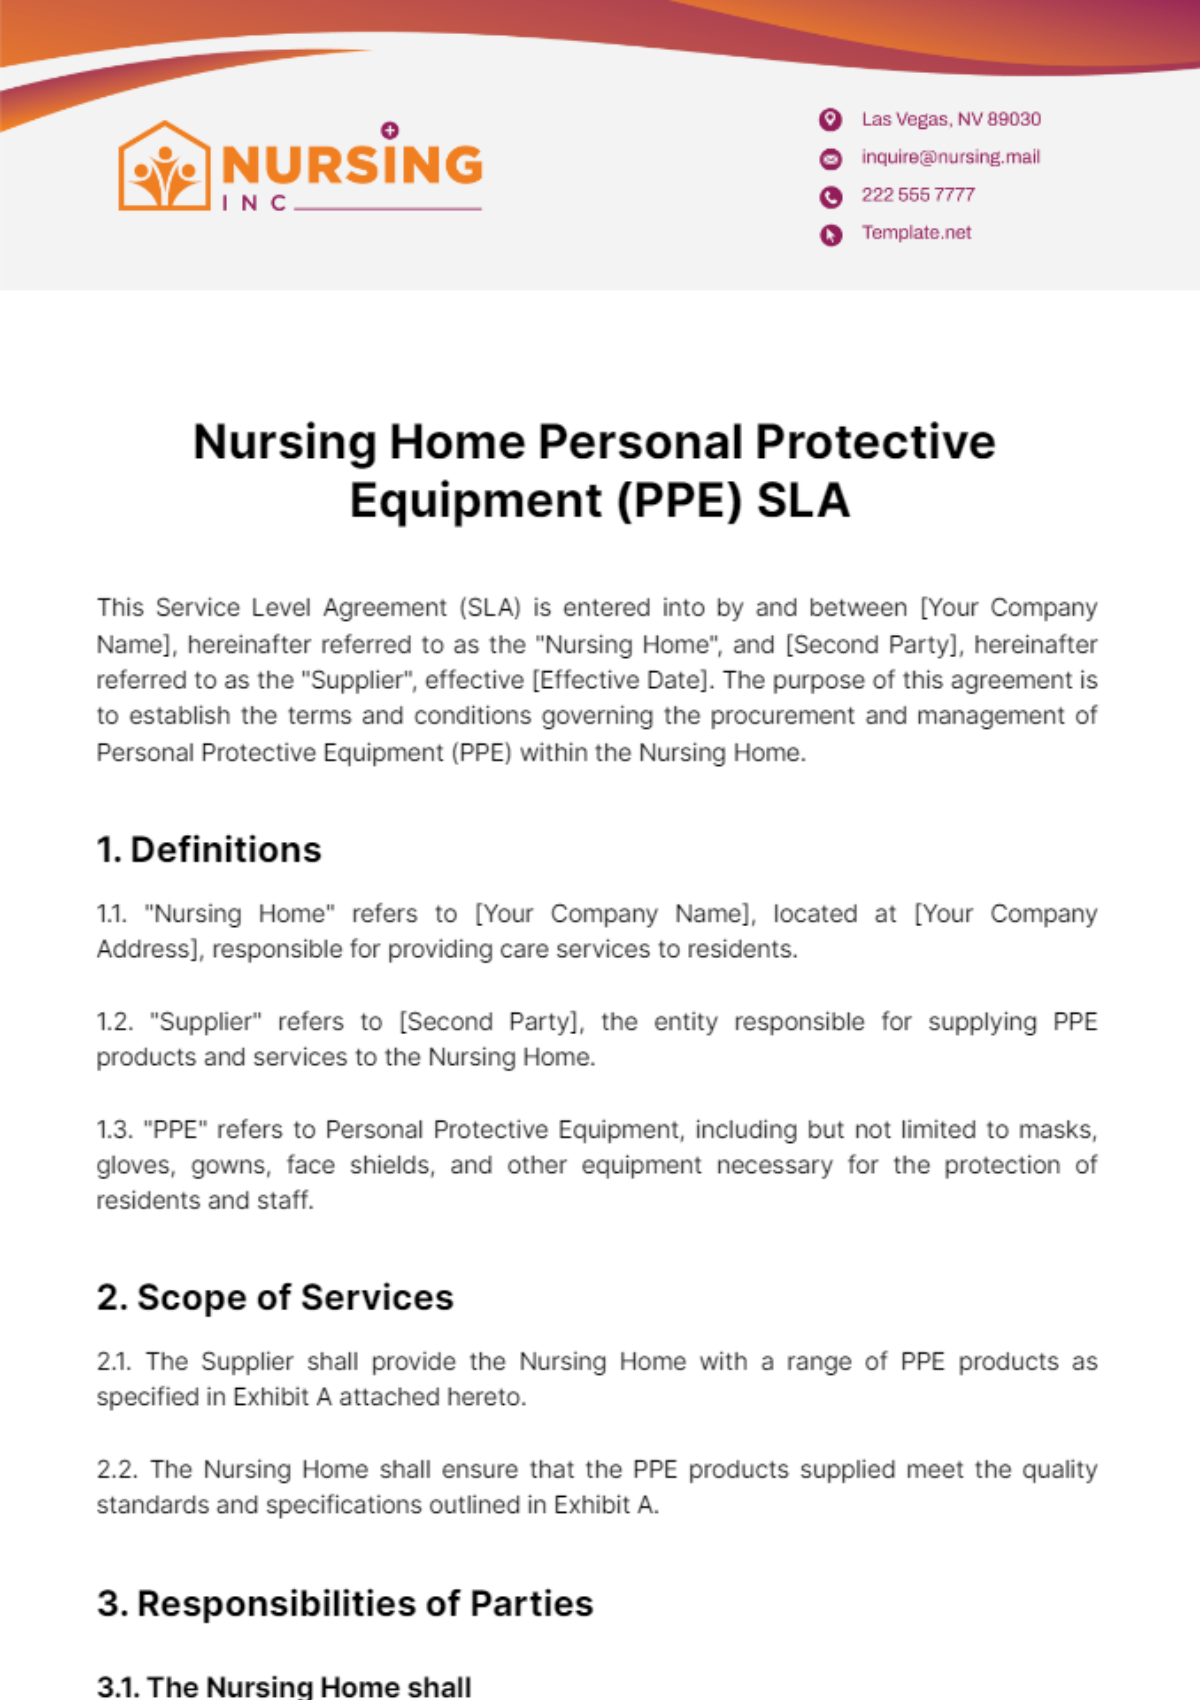 Nursing Home Personal Protective Equipment (PPE) SLA Template